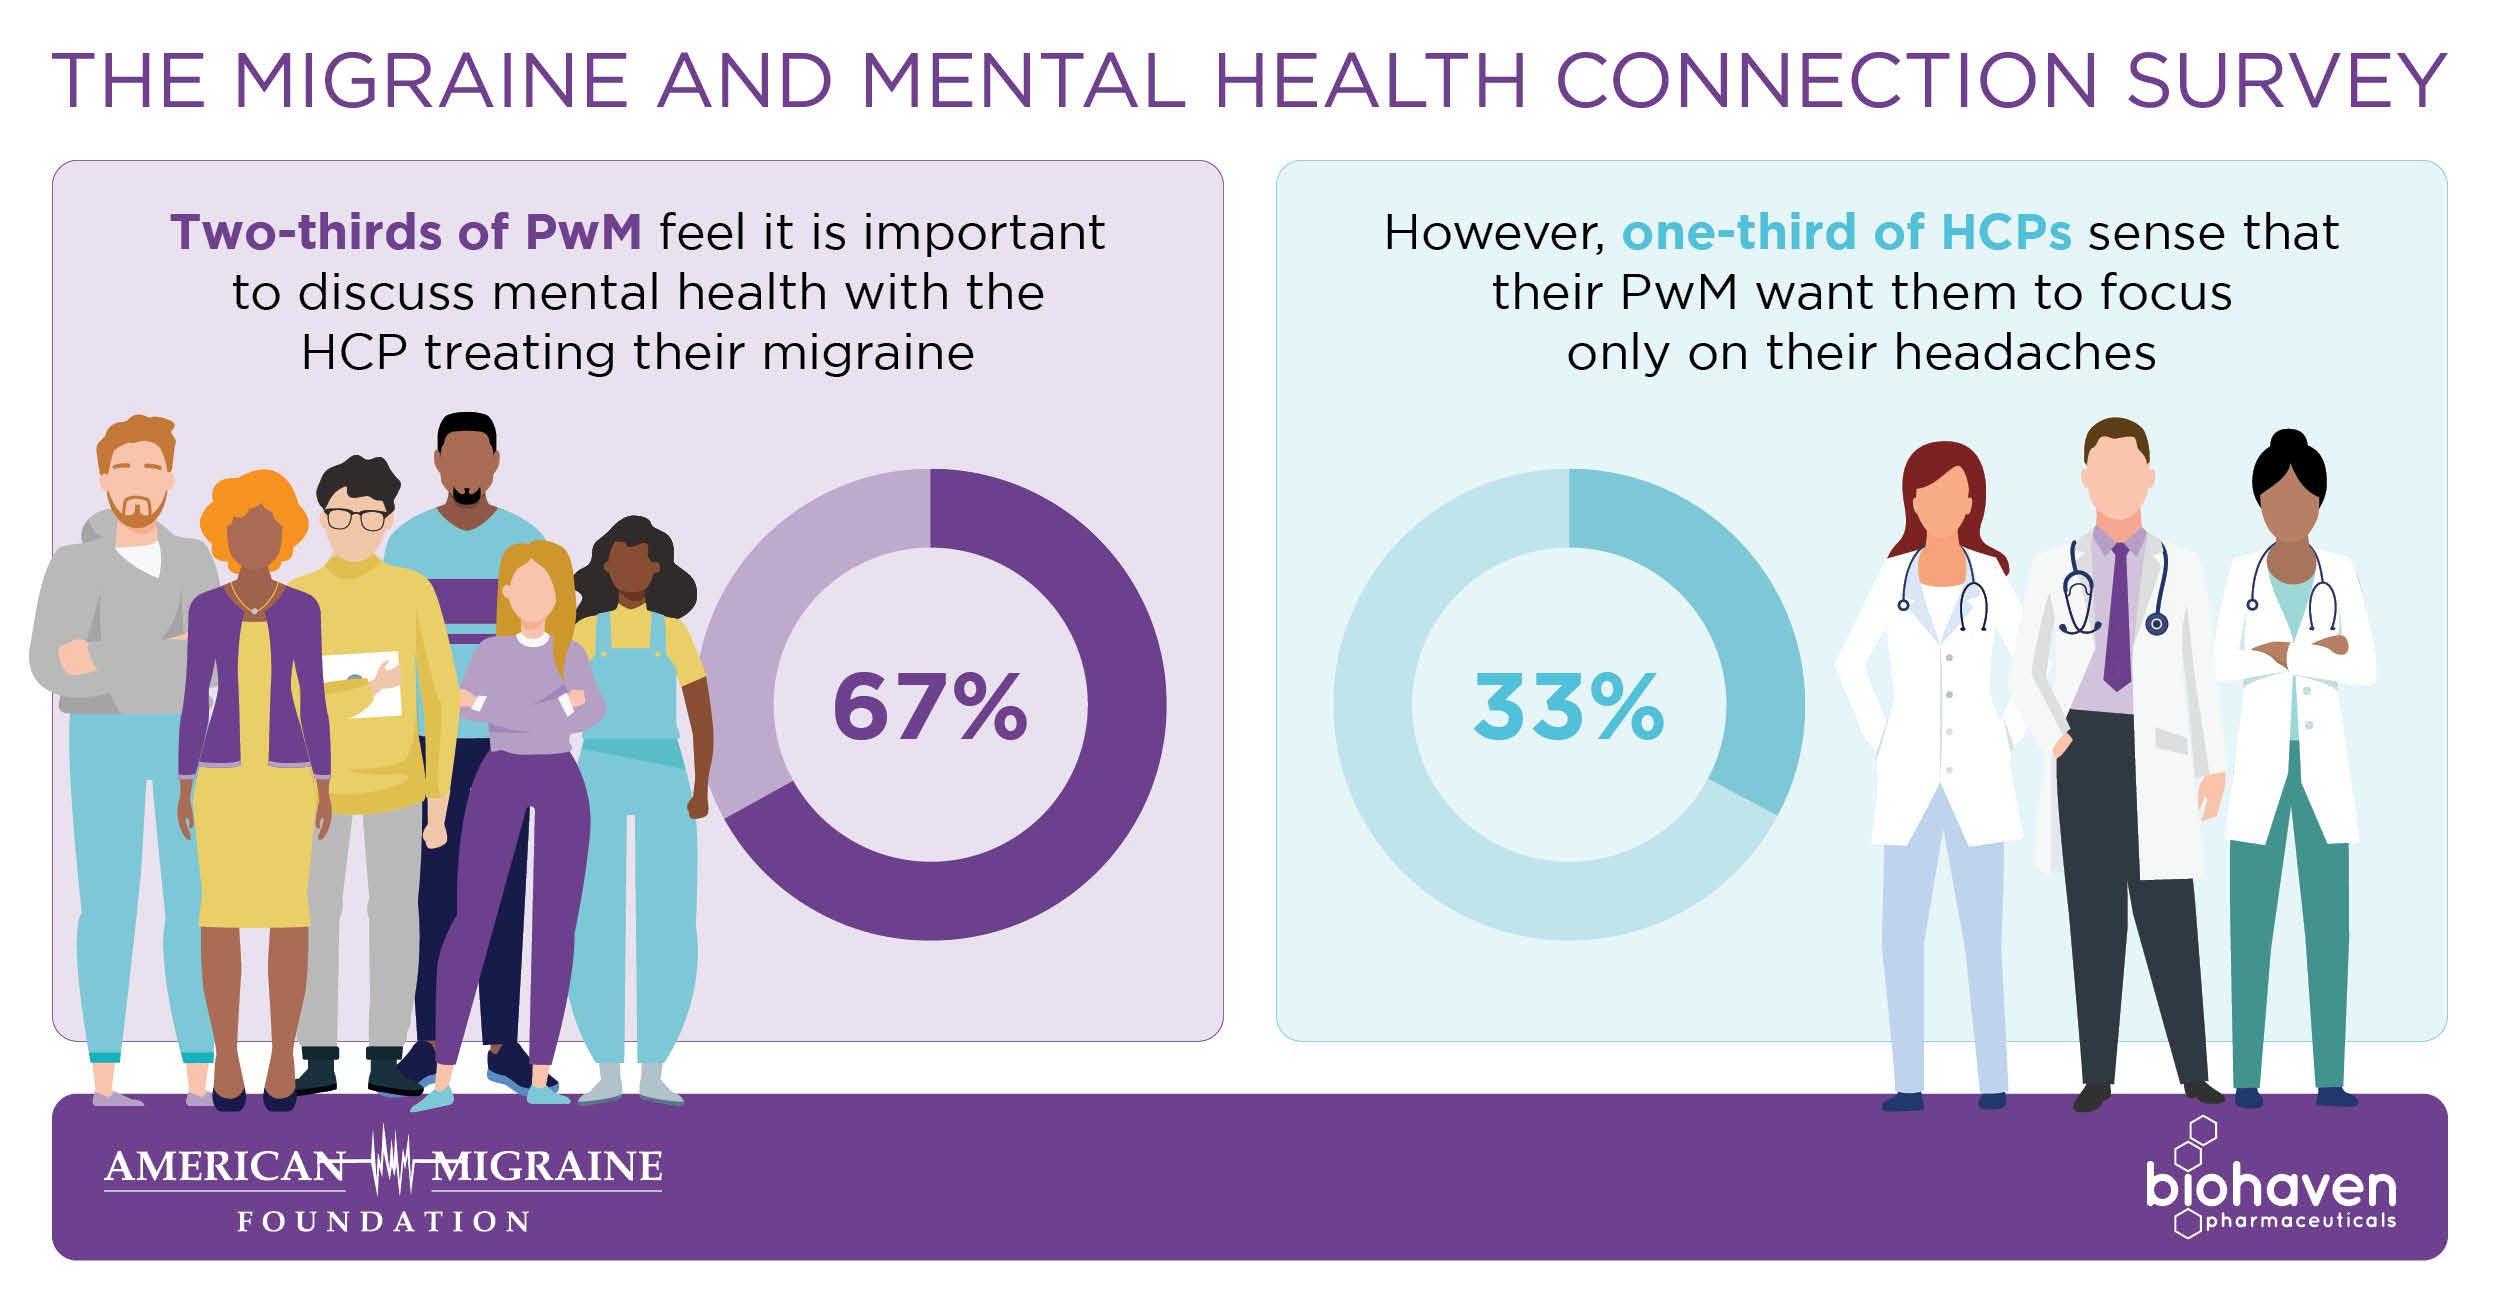 Biohaven survey finds patient-doctor communication gaps on migraine and mental health